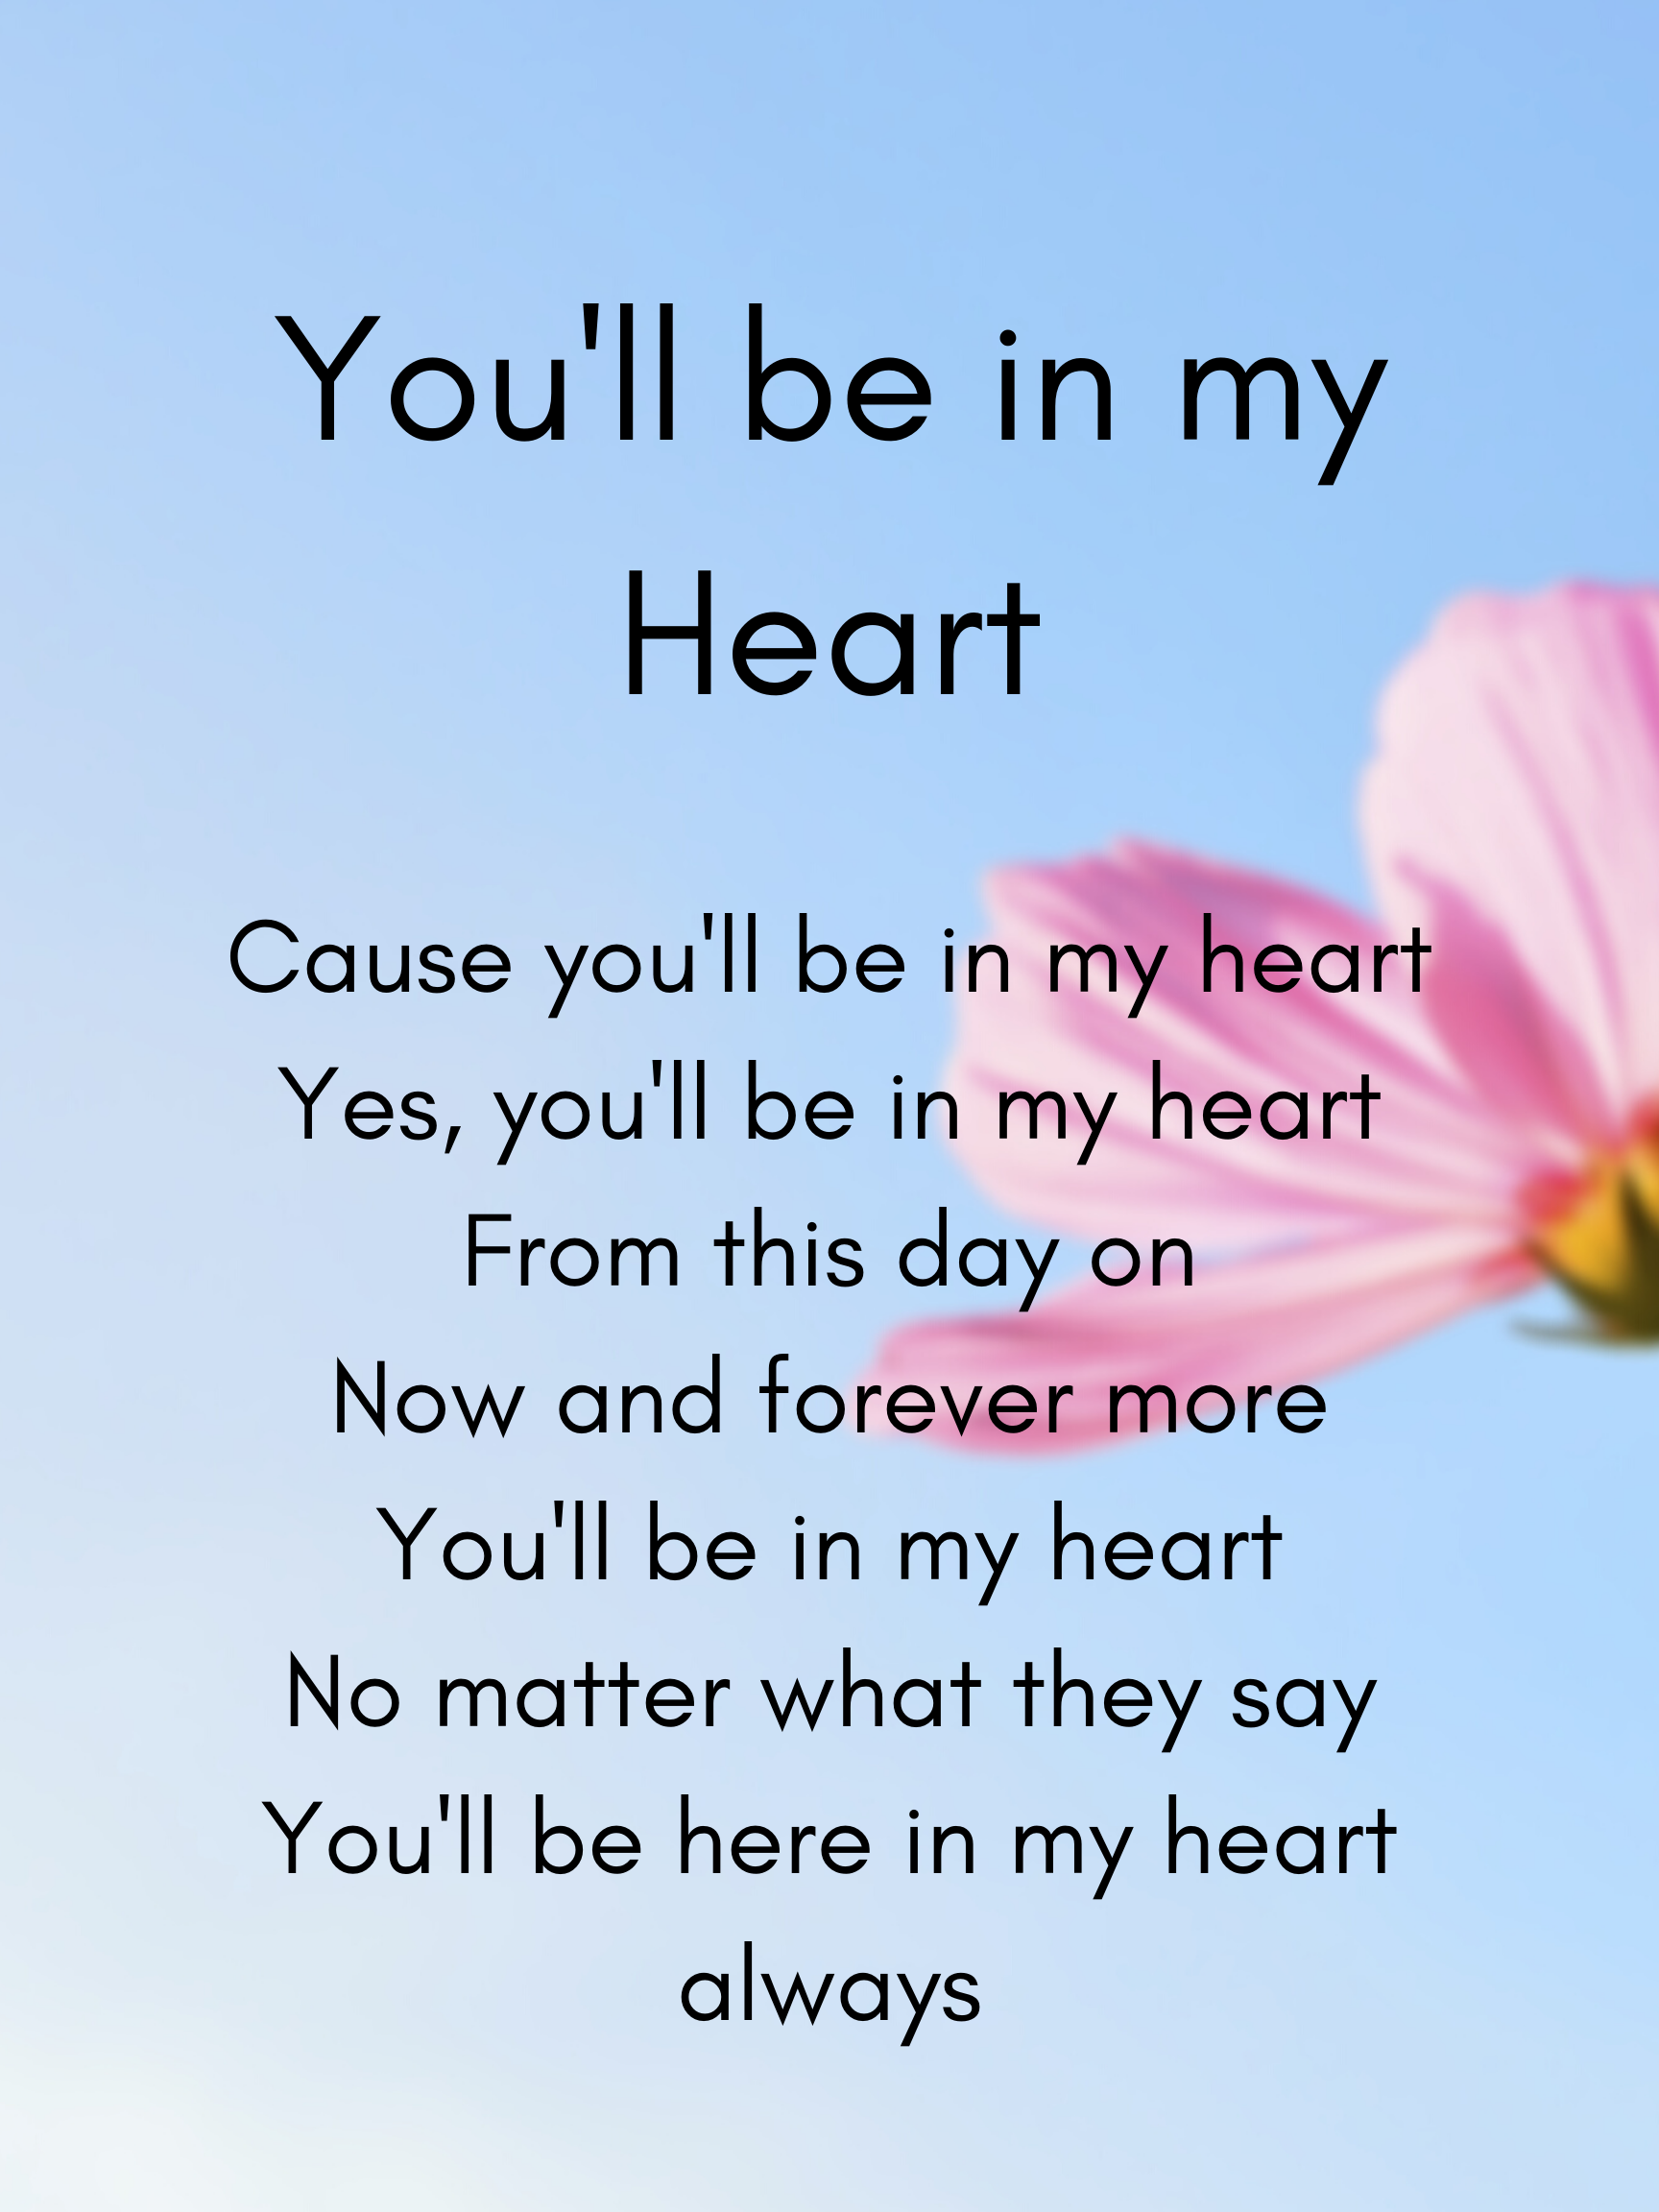 Cause you'll be in my heart Yes, you'll be in my heart From this day on Now and forever more You'll be in my heart No matter what they say You'll be here in my heart always.png